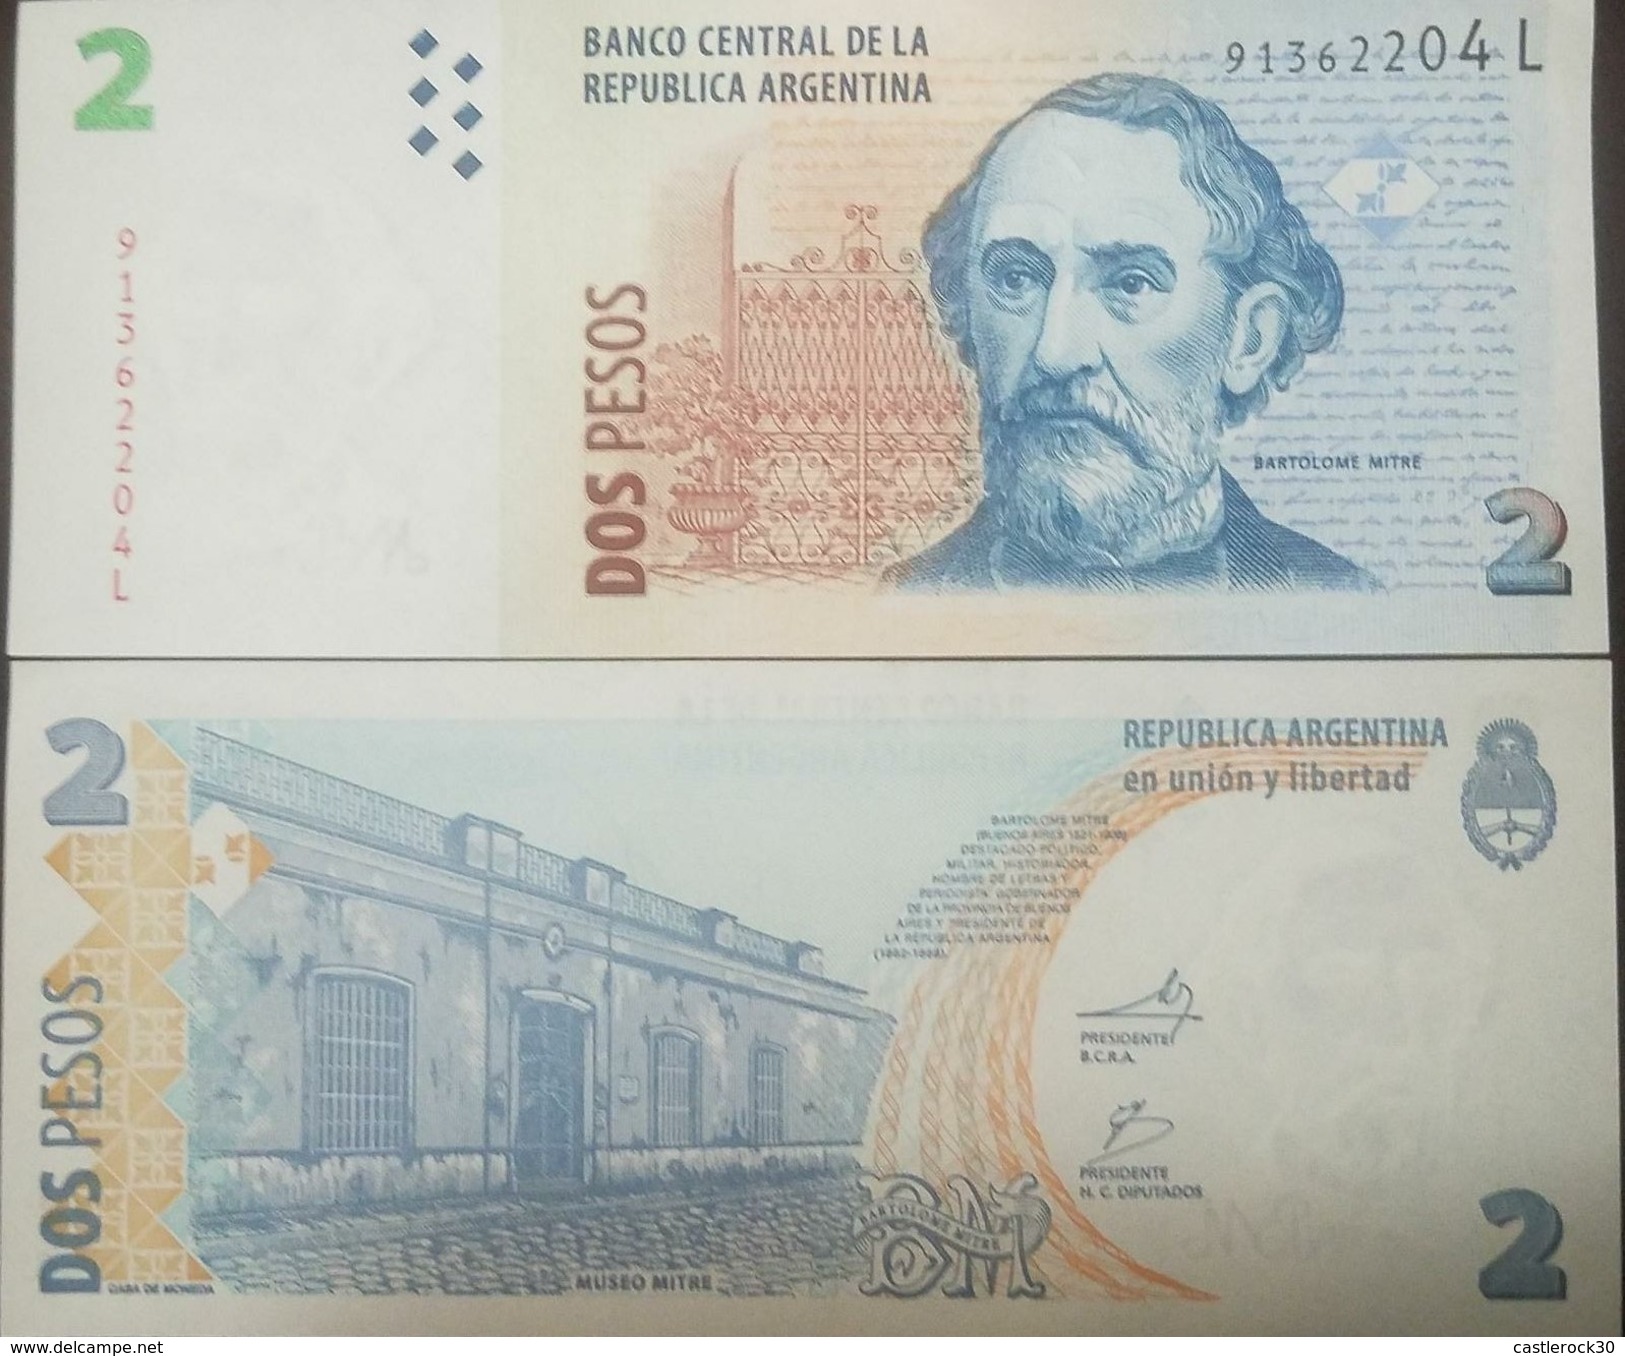 O) 2002 ARGENTINA. BANKNOTE 2 PESOS ARP, BATOLOME MITRE-MITRE HOUSE MUSEUM-ARCHITECTURE COLONIAL HOUSE 1785, PAPER MONEY - Argentina